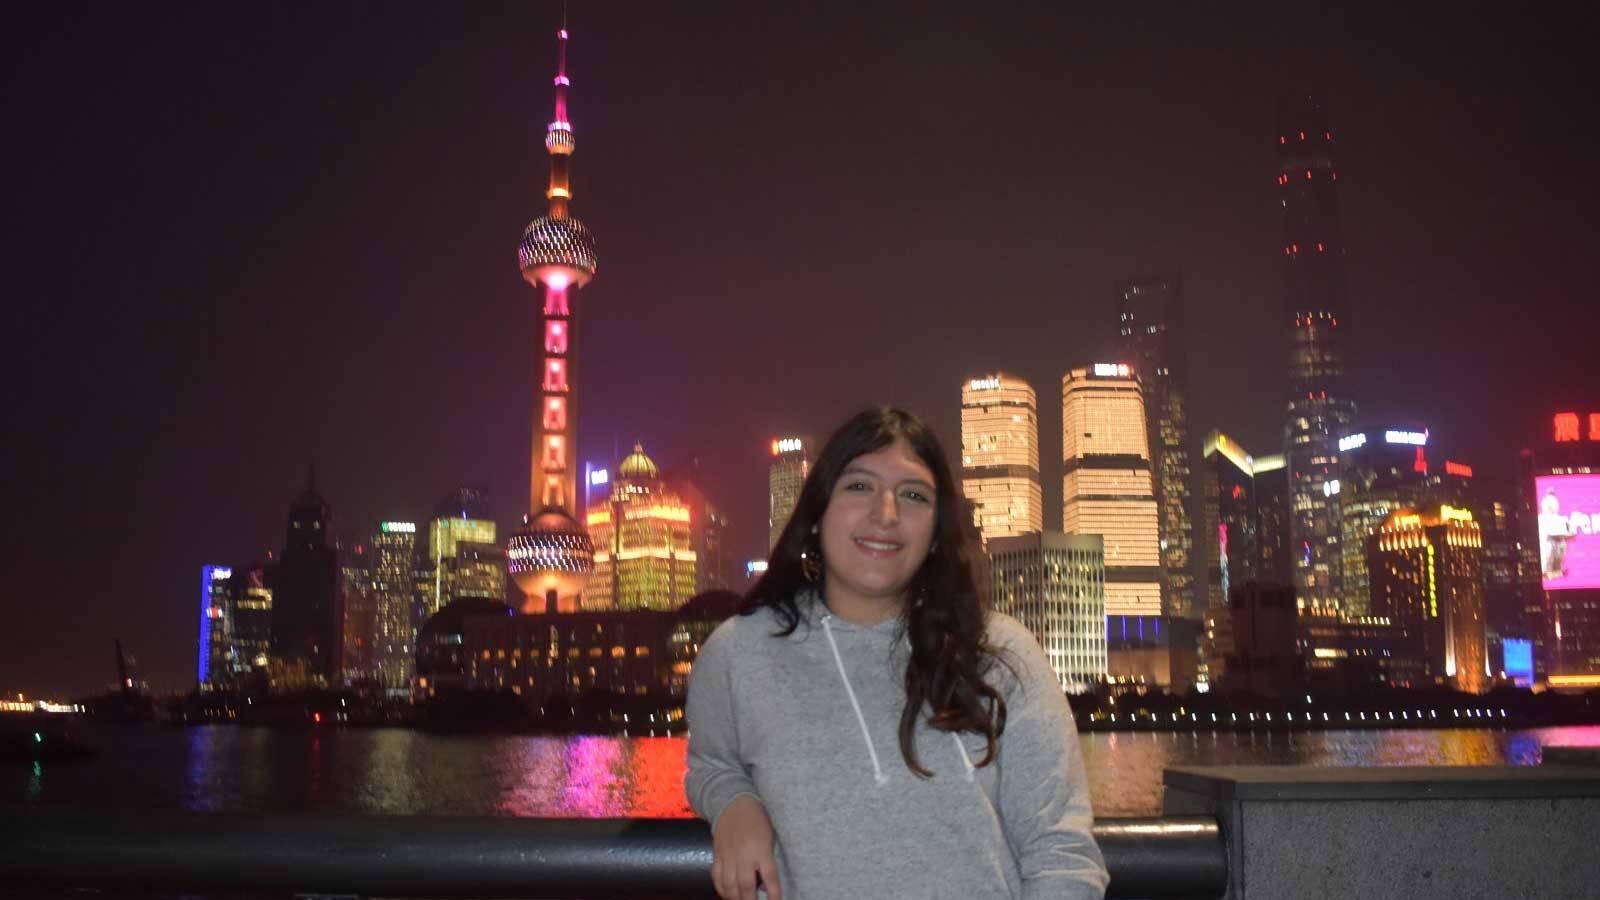 Elizabeth Gonzales in front of the illuminated Singapore skyline at night